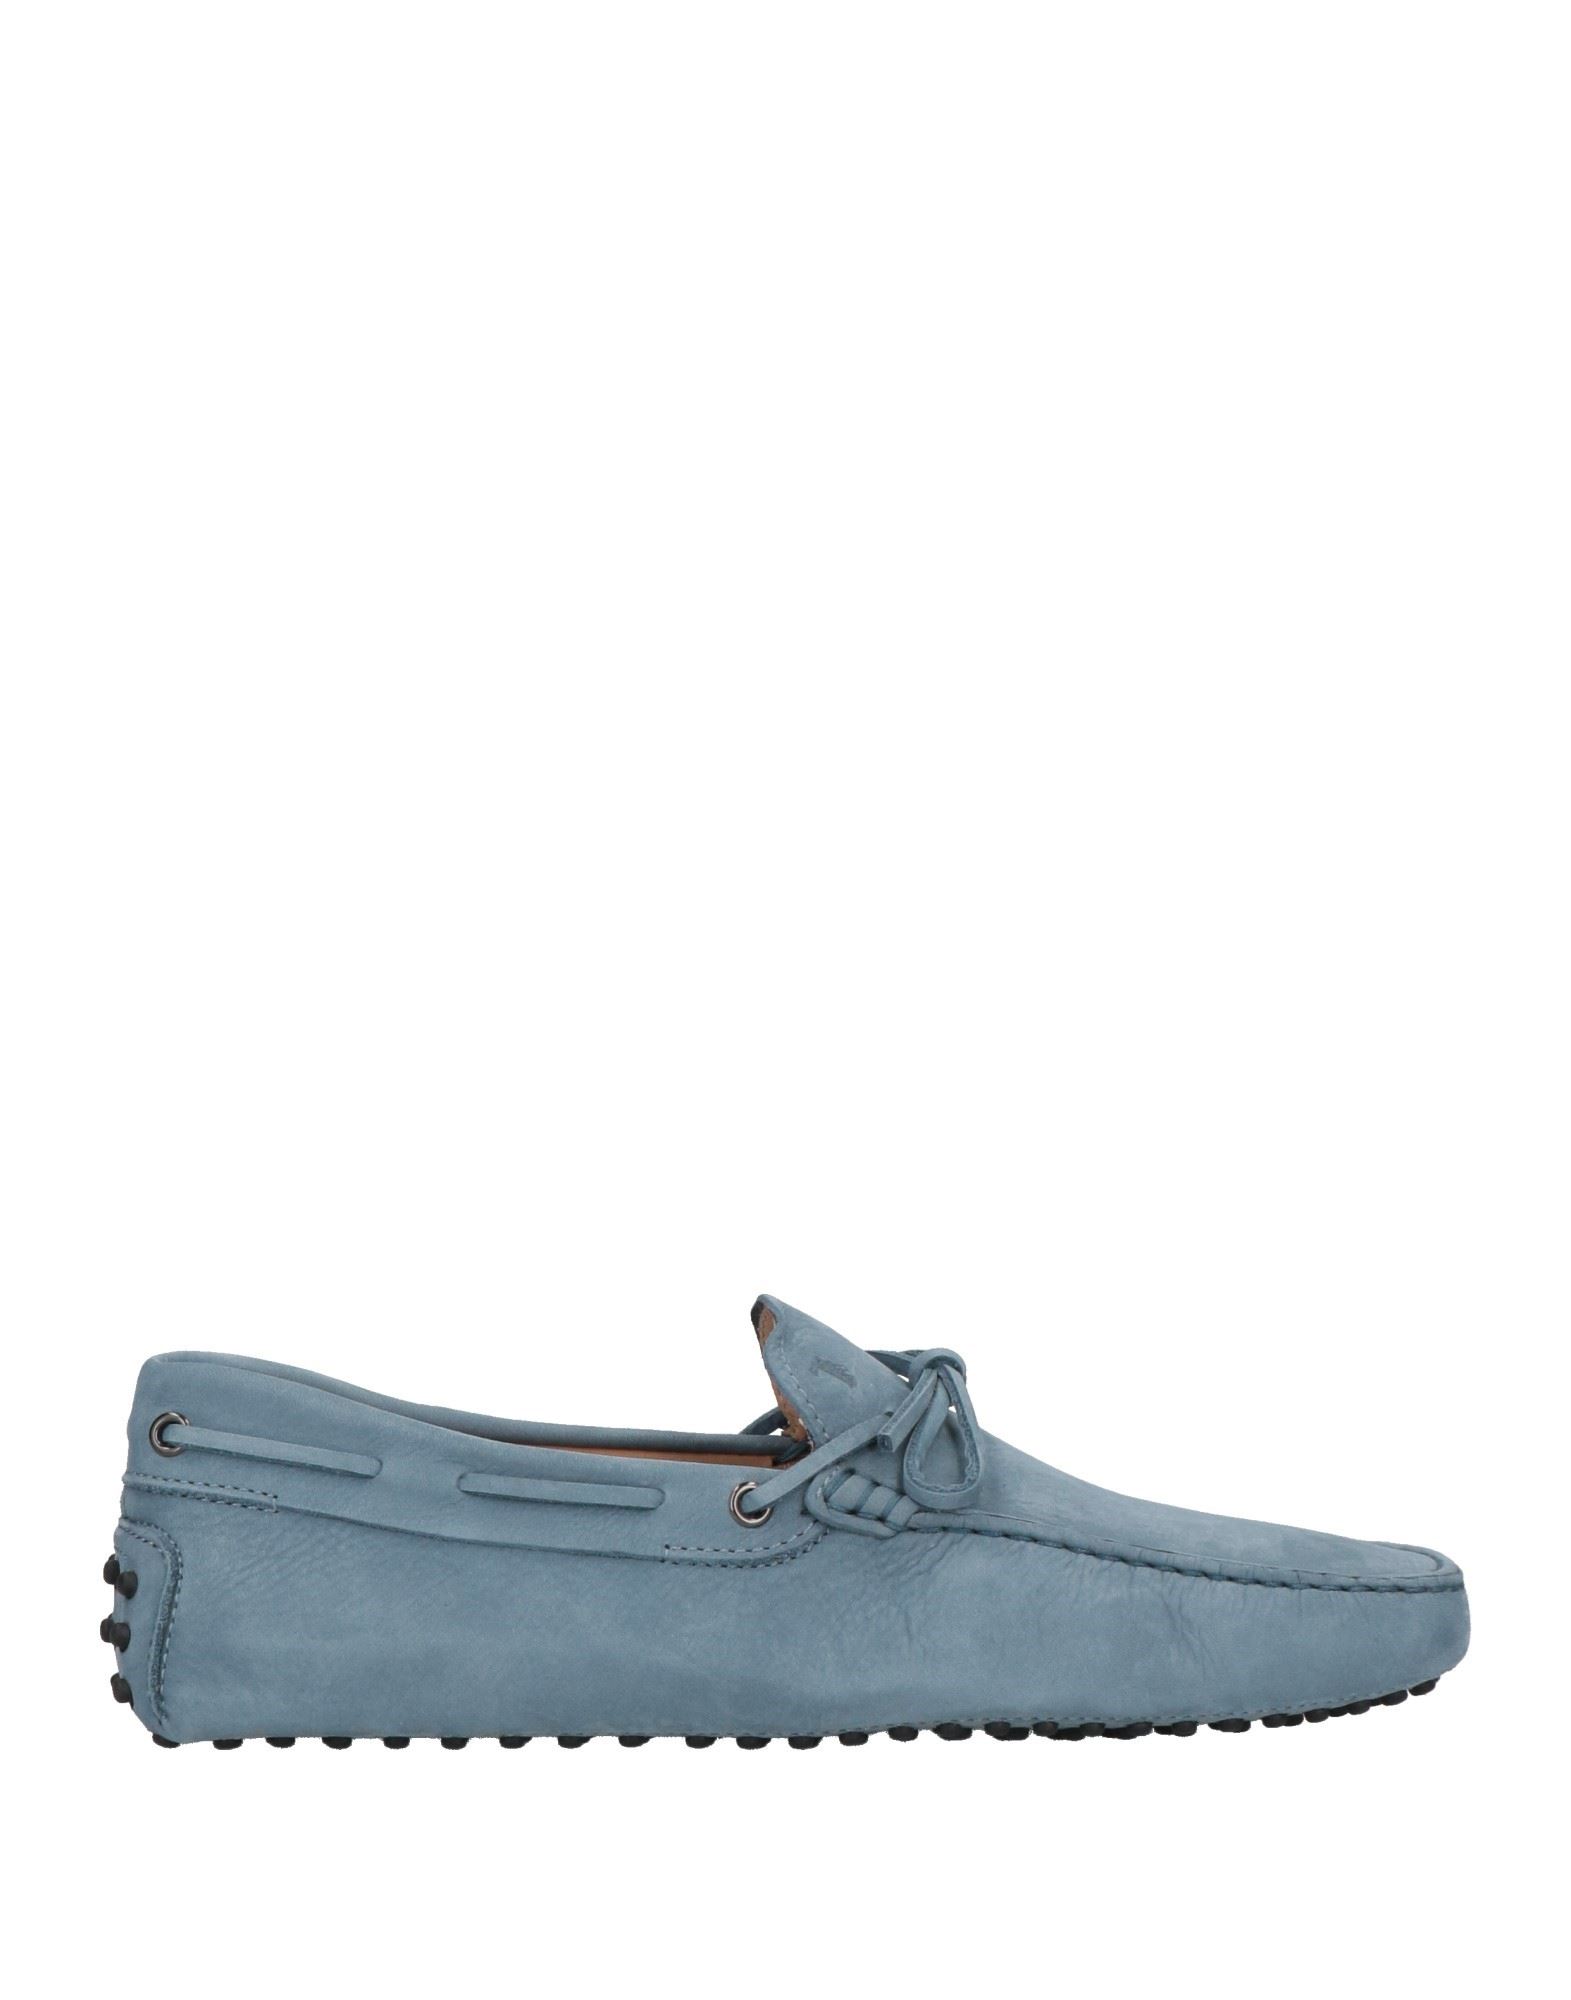 Tod's Man Loafers Pastel Blue Size 7 Leather